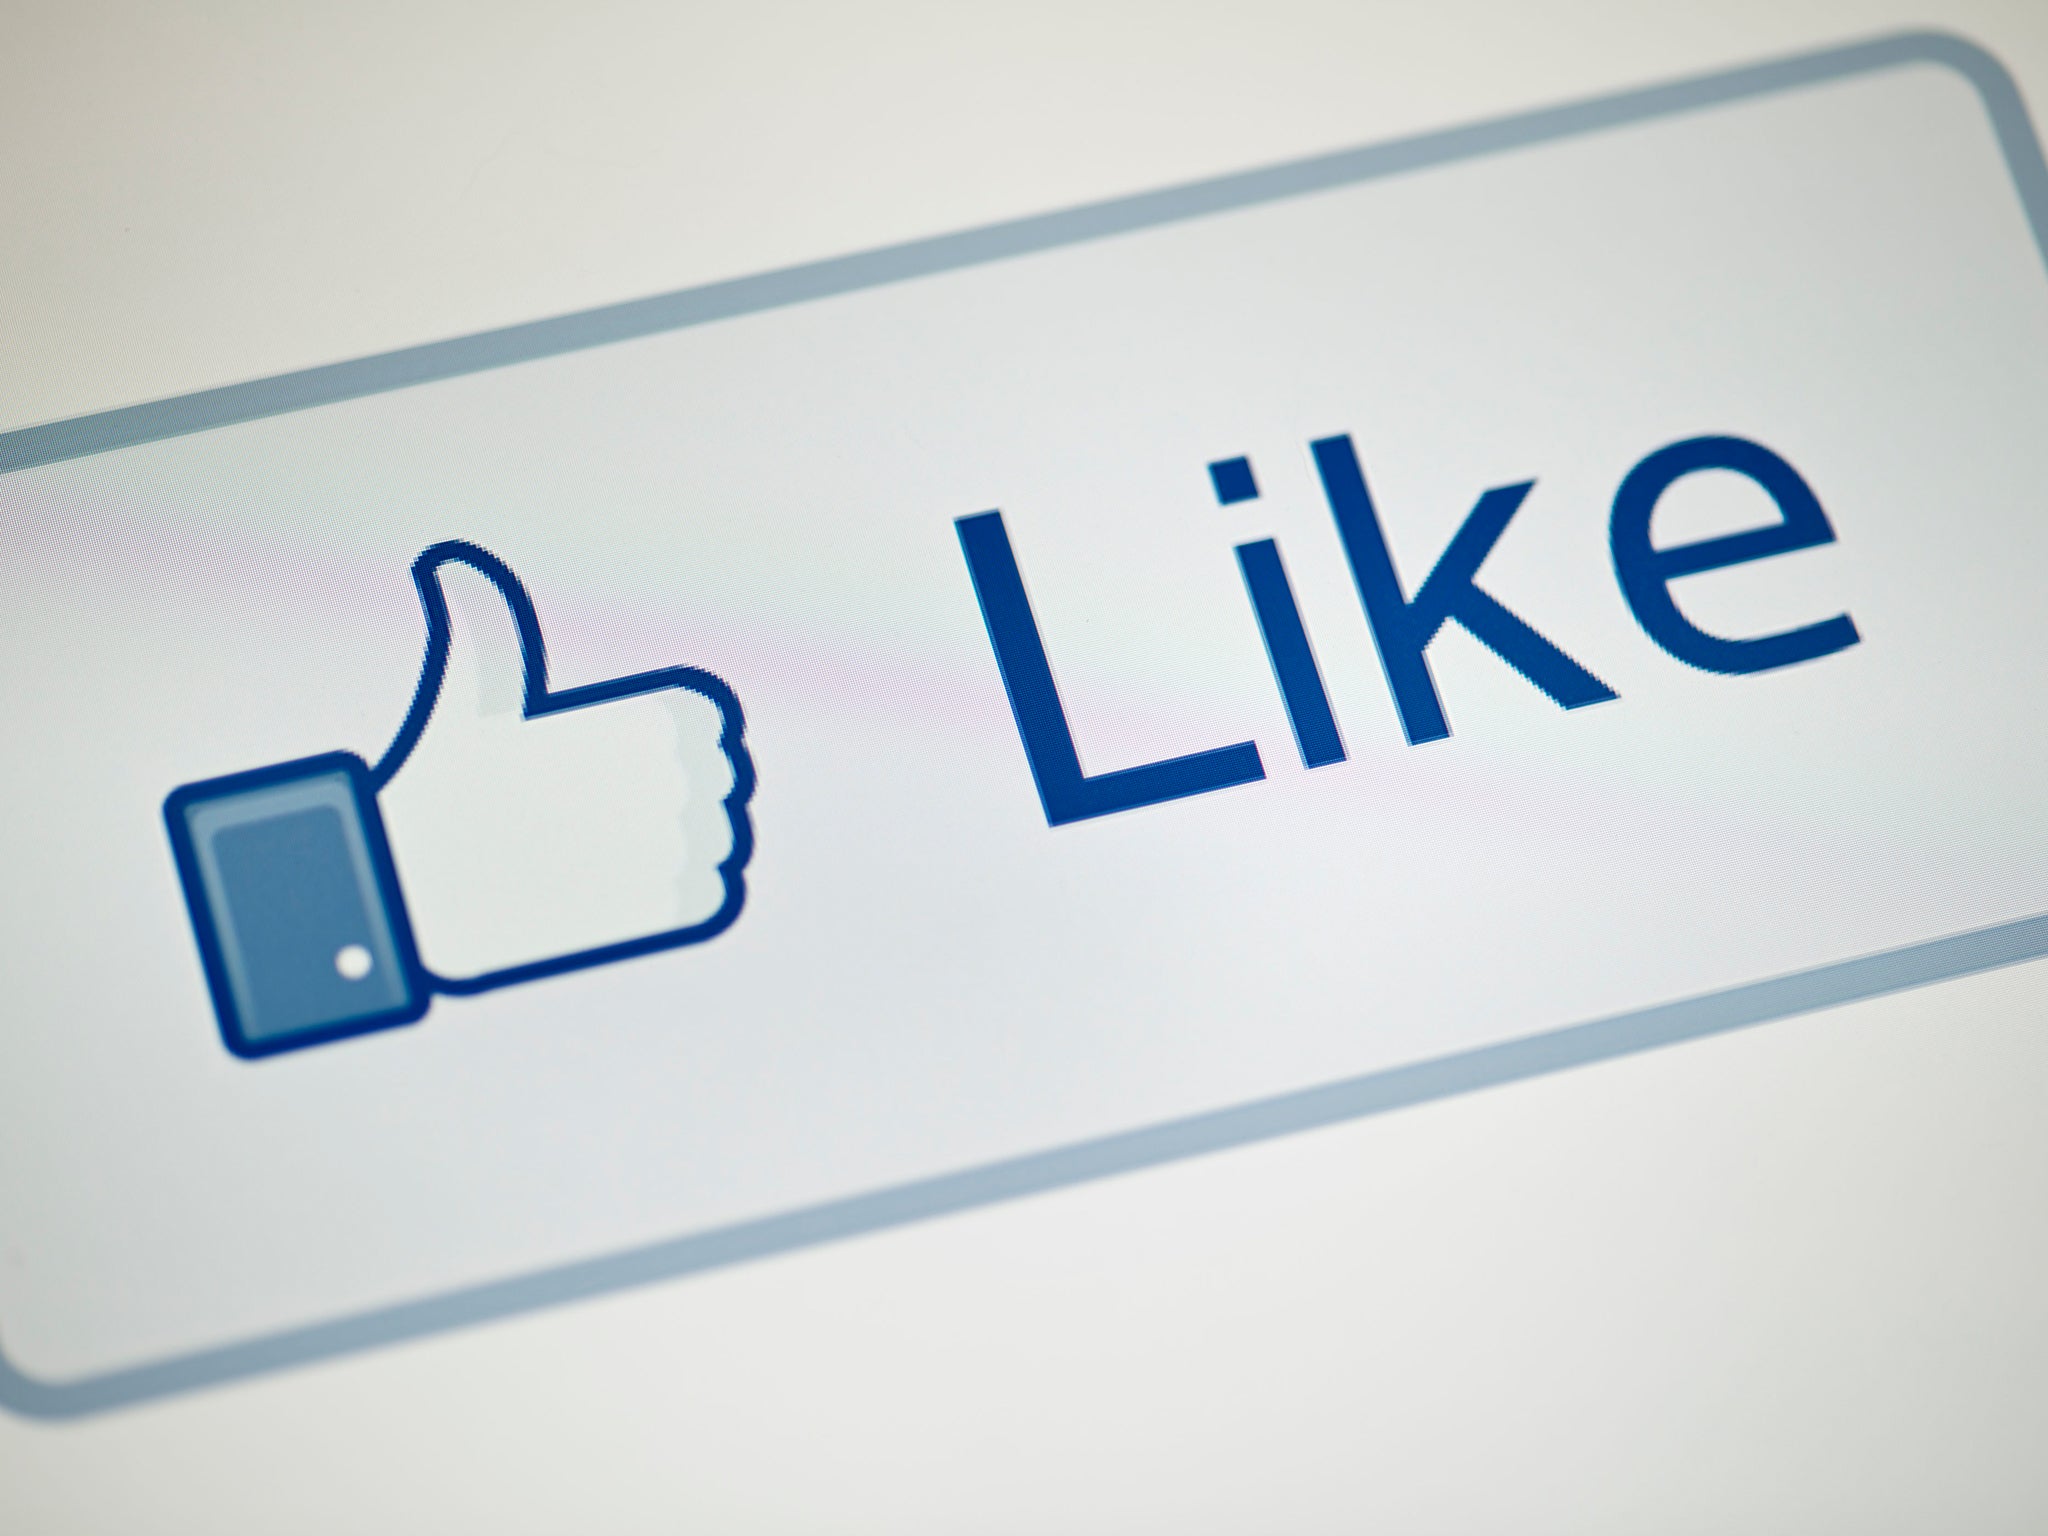 The study involved using machine-learning software to analyse Facebook “likes” to assess a person’s personality based on the five main traits commonly used in psychological assessments: openness, conscientiousness, extraversion, agreeableness, and neuroti